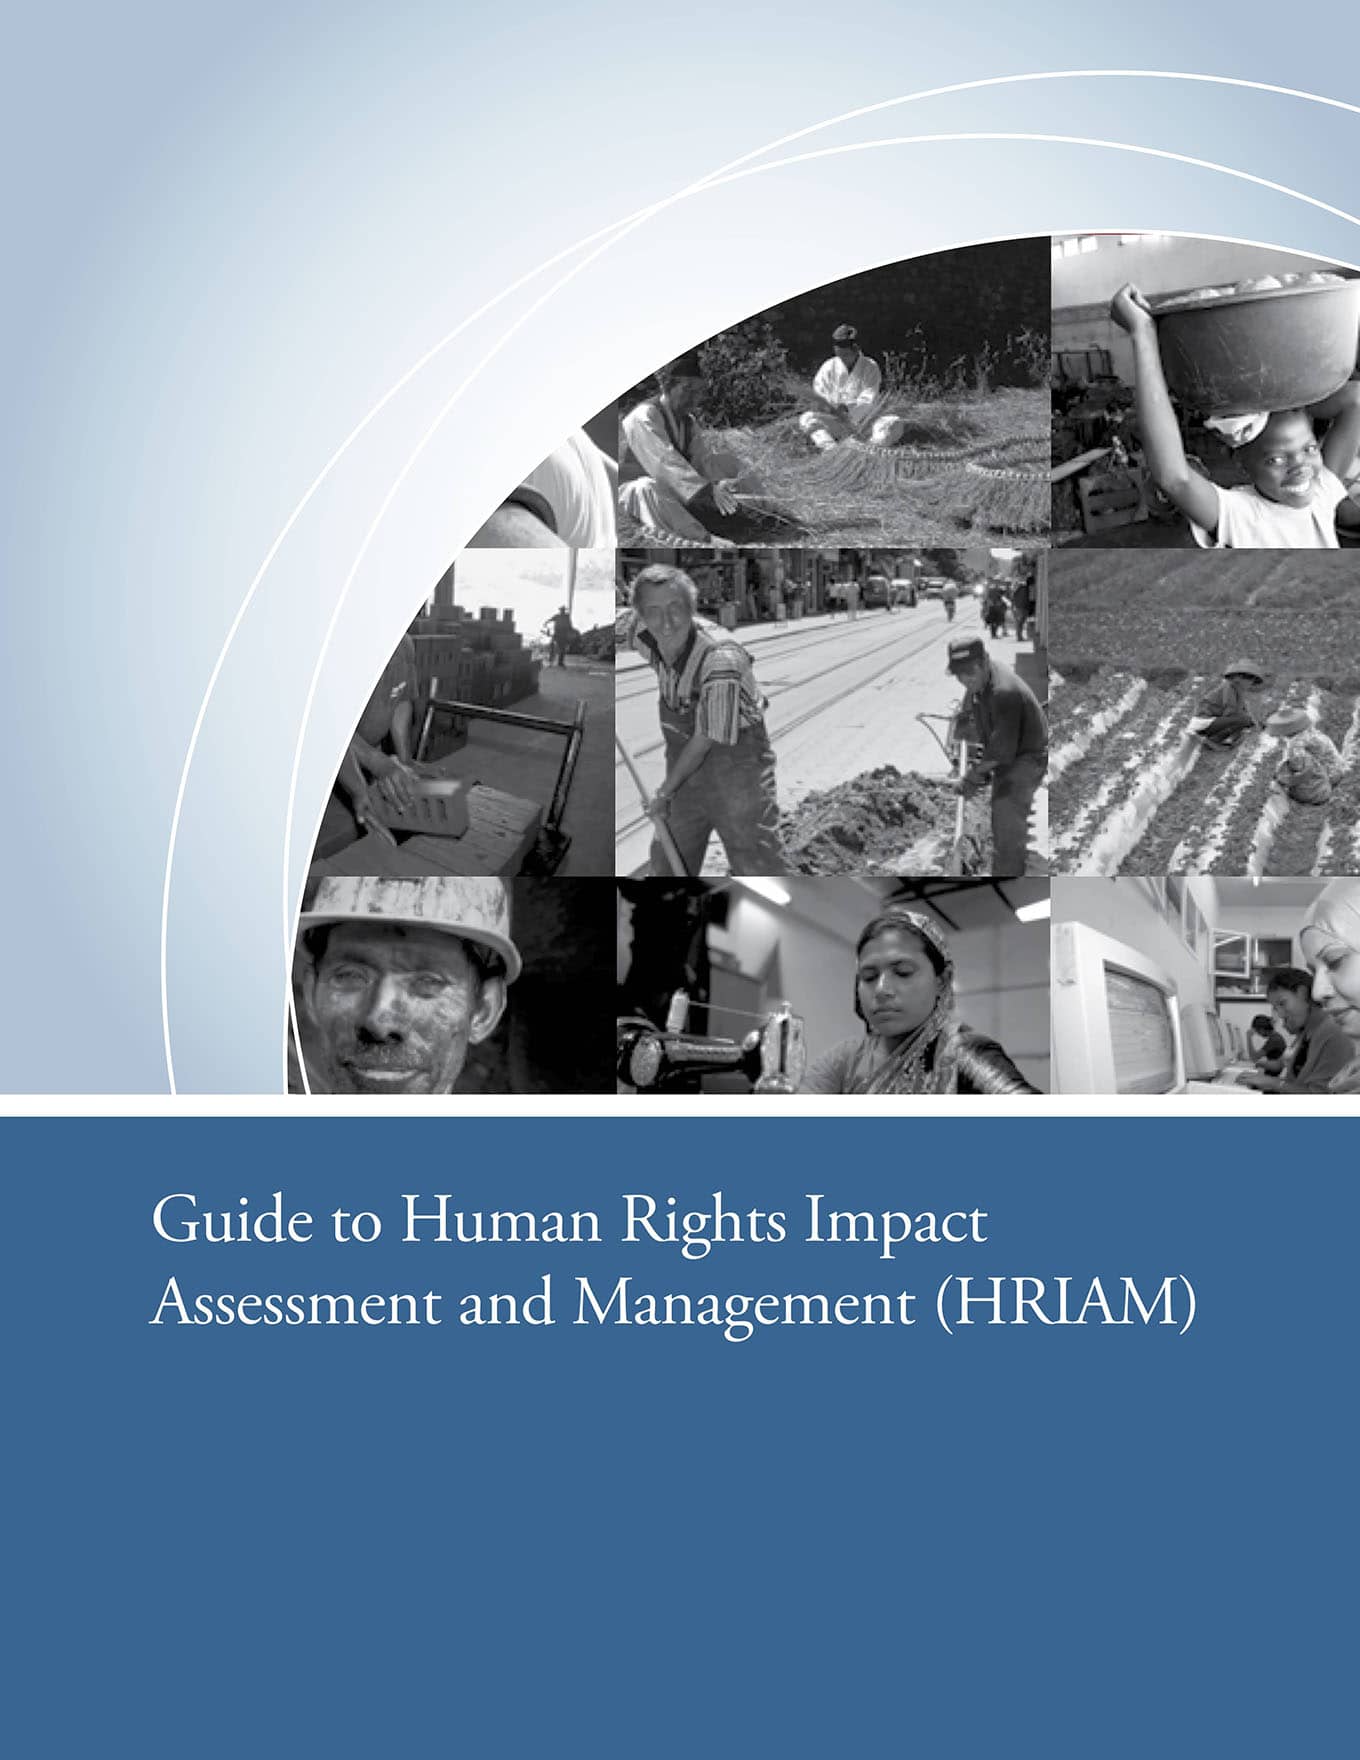 Guide to Human Rights Impact Assessment and Management (IBLF and IFC, 2010)